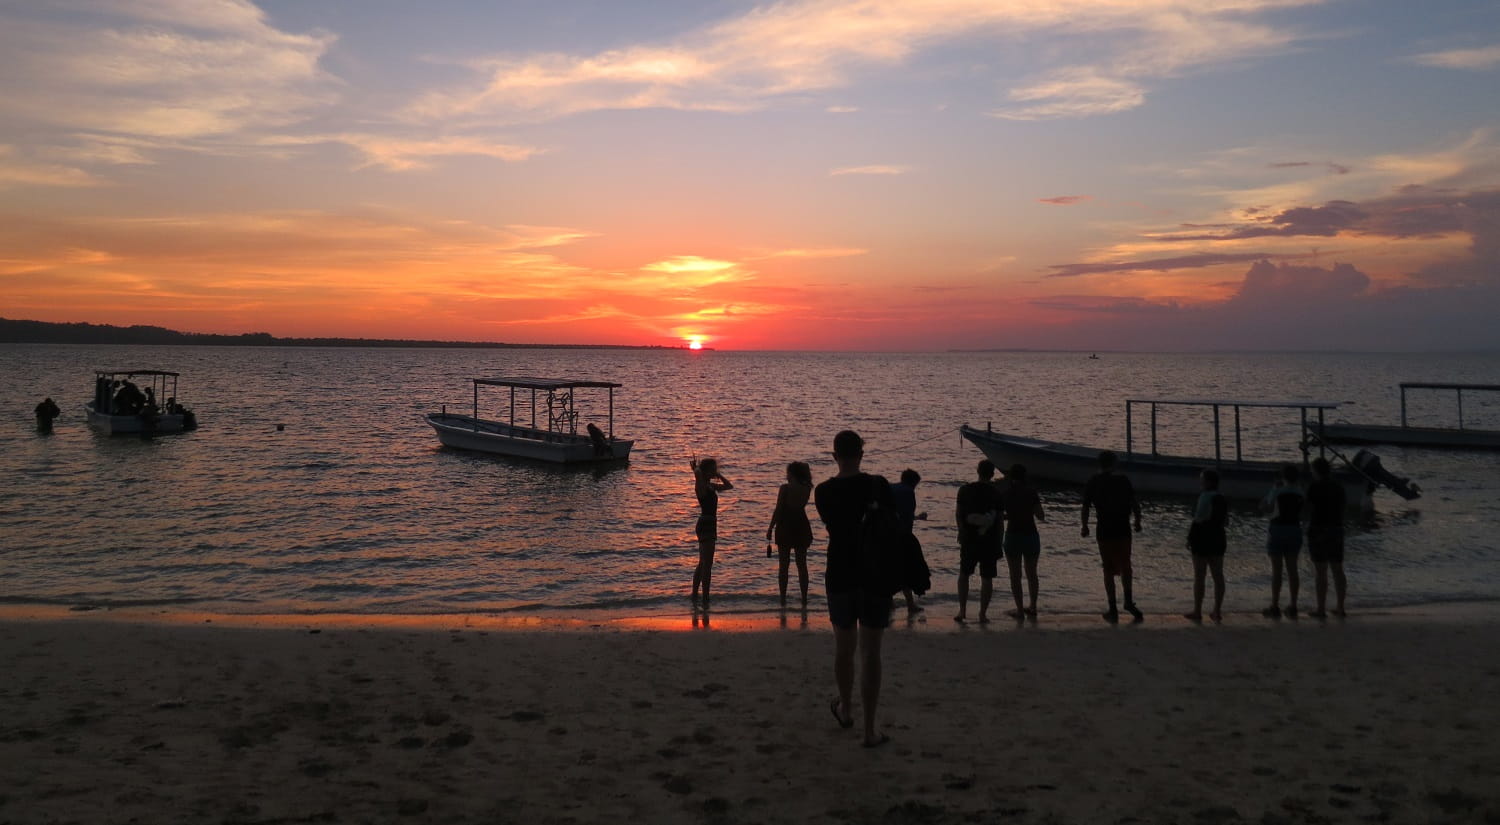 Silhouettes of students on a beach with an orange sunset in the distance across the water.